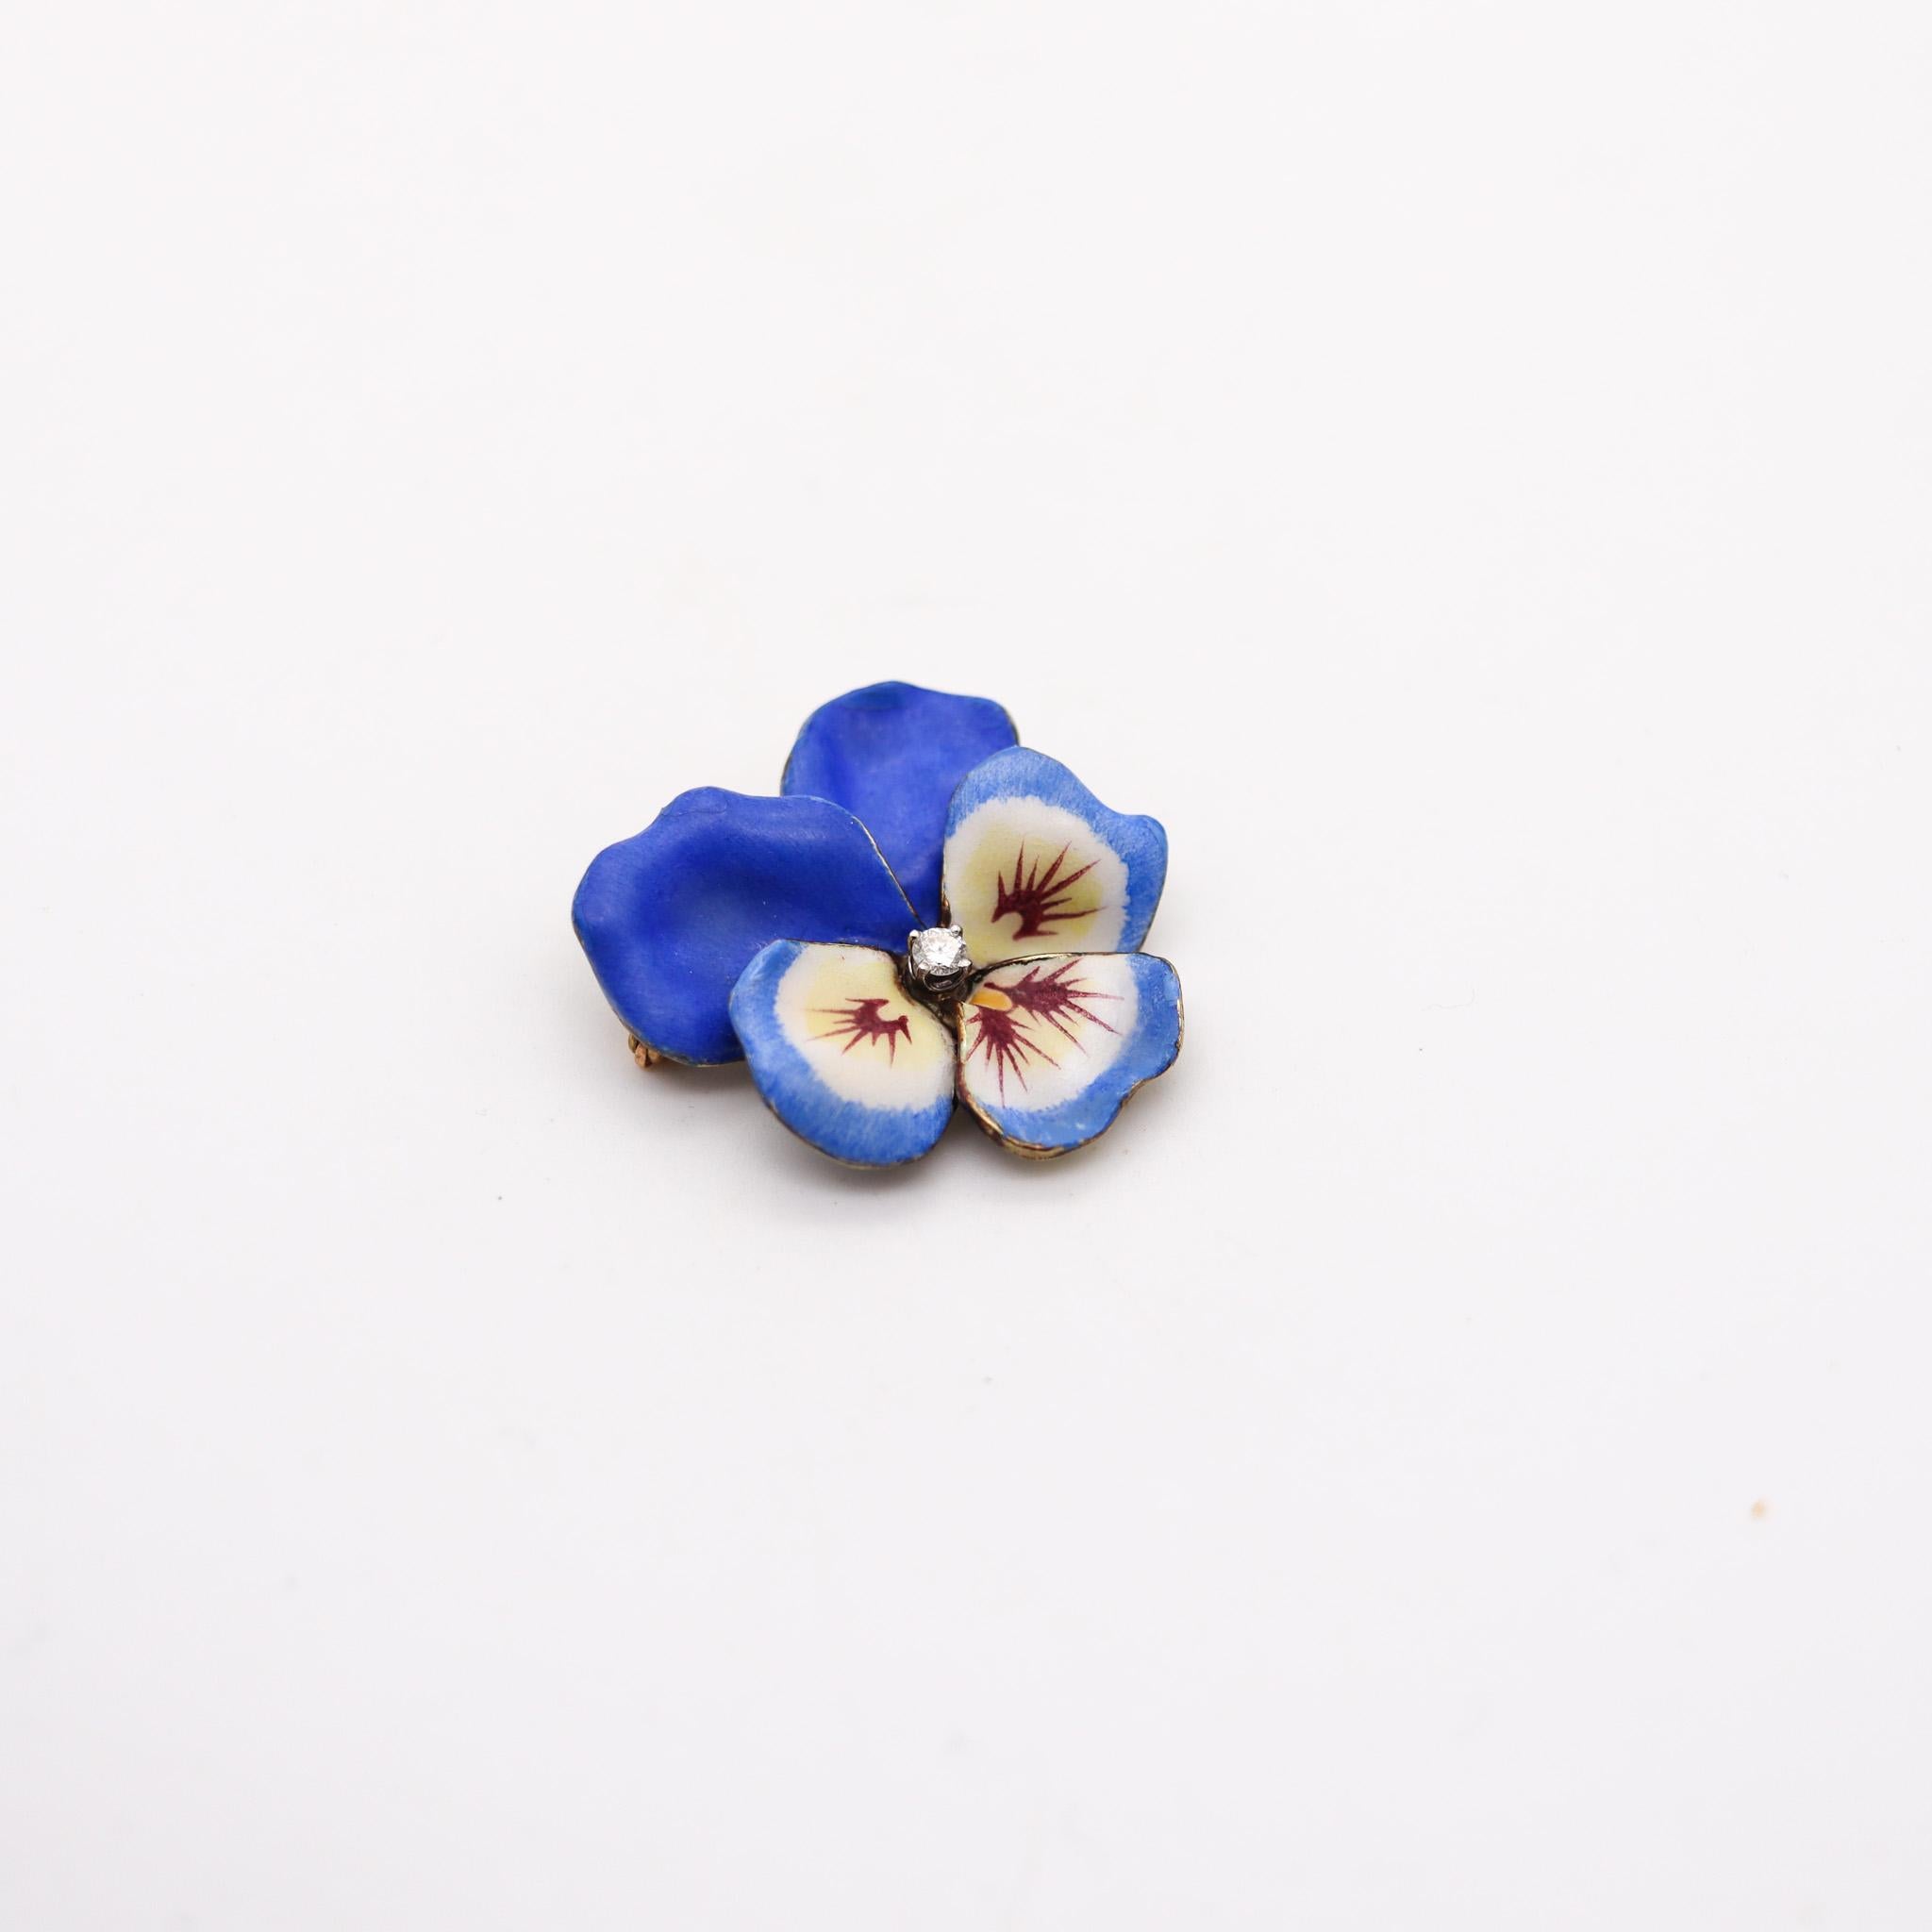 Enameled Pansy flower brooch designed by Larter & Son.

A pristine Edwardian art Nouveau flower brooch, created in Newark New Jersey by the jewelry company of Larter & Sons., back in the 1900. This beautiful brooch has been carefully crafted in